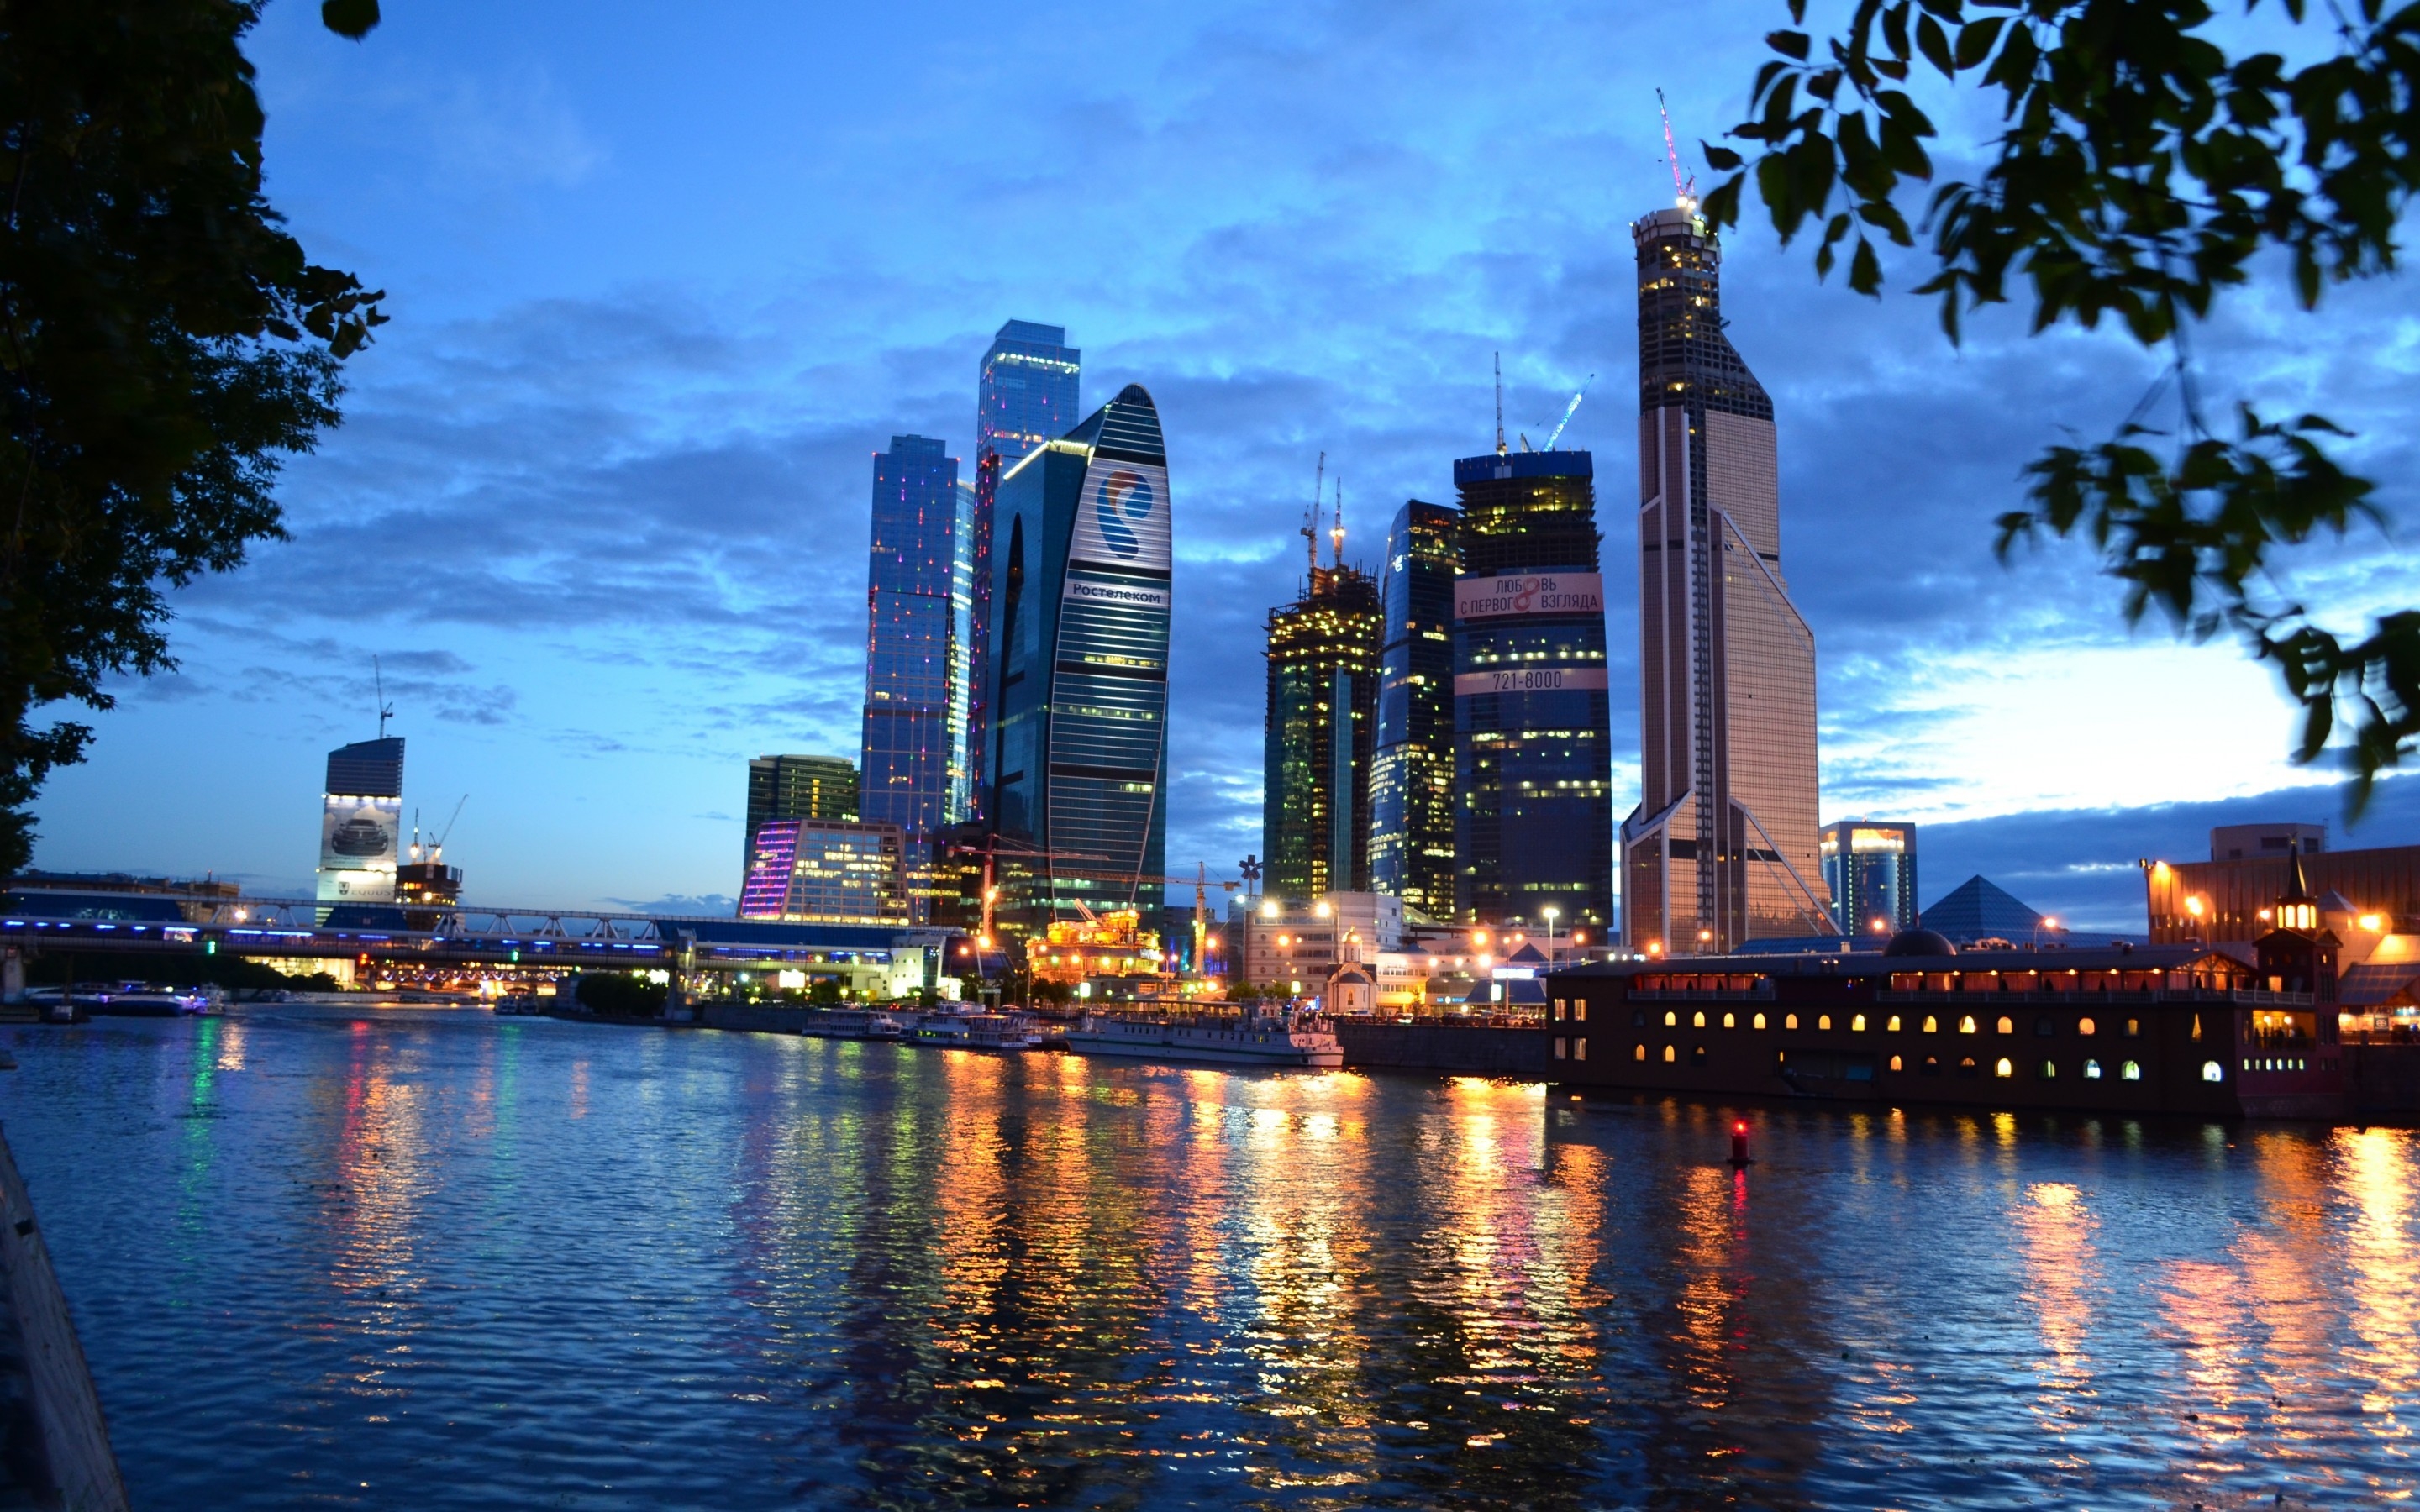 Moscow City for 2880 x 1800 Retina Display resolution